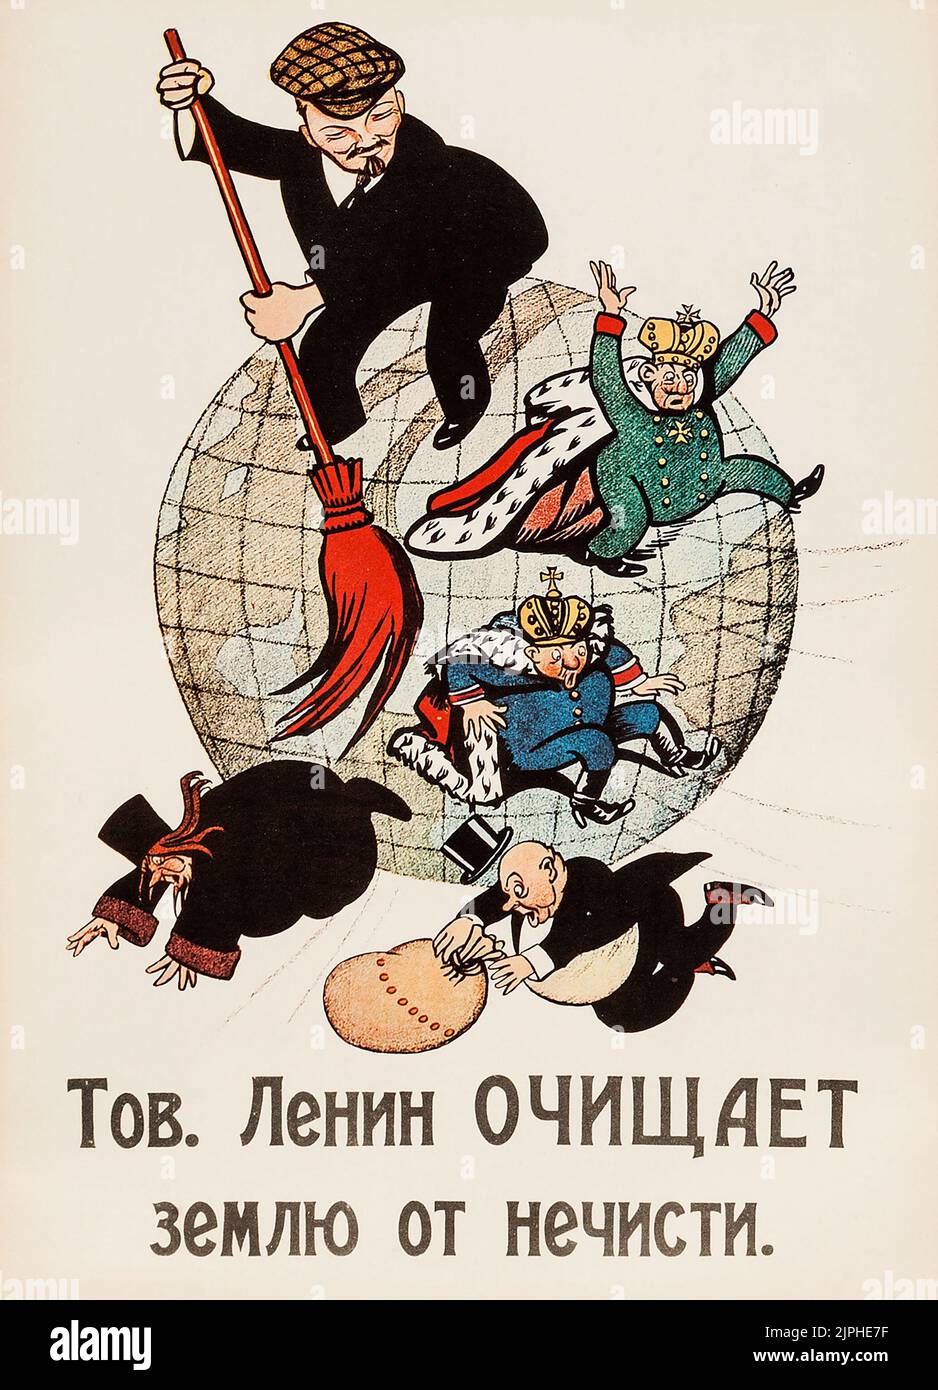 Soviet Propaganda Poster (R-1960s). Russian Poster feat Lenin cleaning up the world. Stock Photo